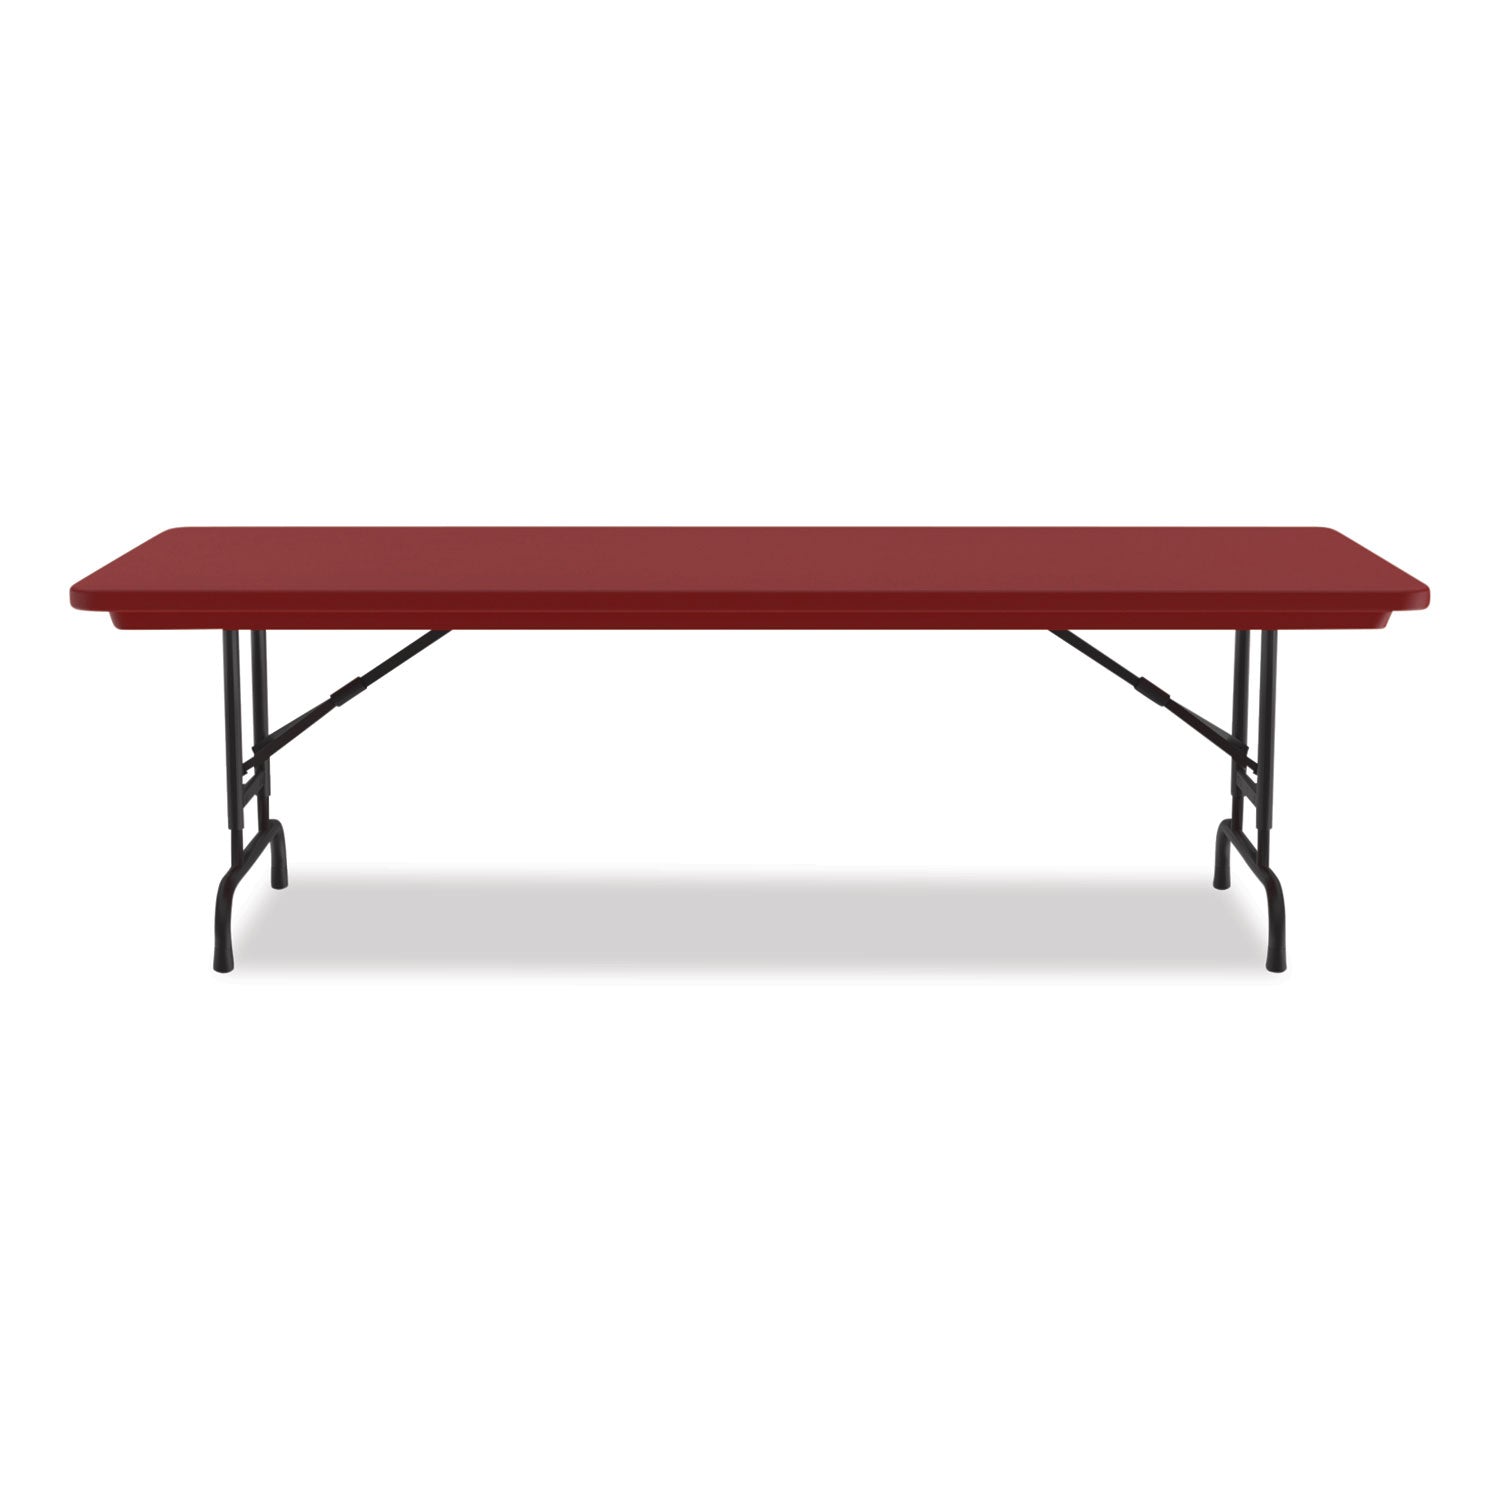 adjustable-folding-tables-rectangular-60-x-30-x-22-to-32-red-top-black-legs-4-pallet-ships-in-4-6-business-days_crlra3060254p - 8